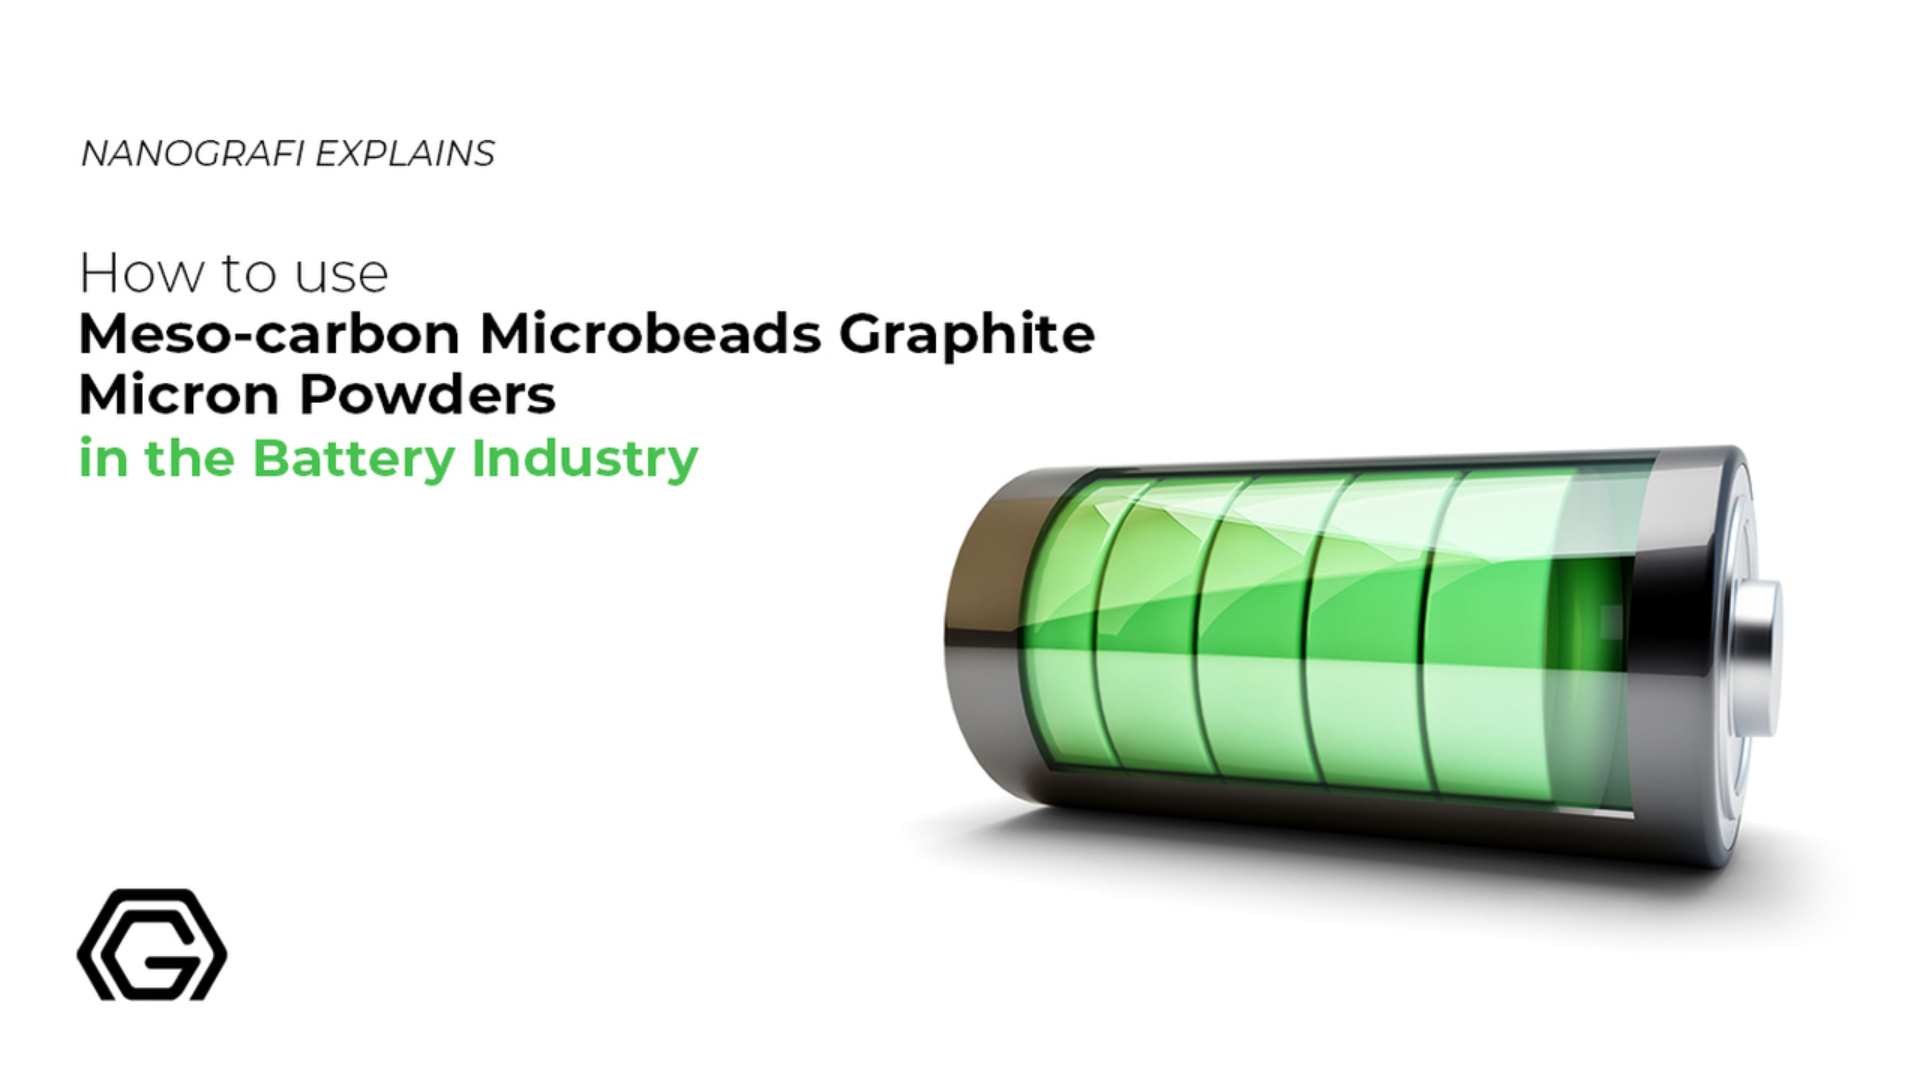 How to use meso-carbon microbeads graphite micron powders in the battery industry